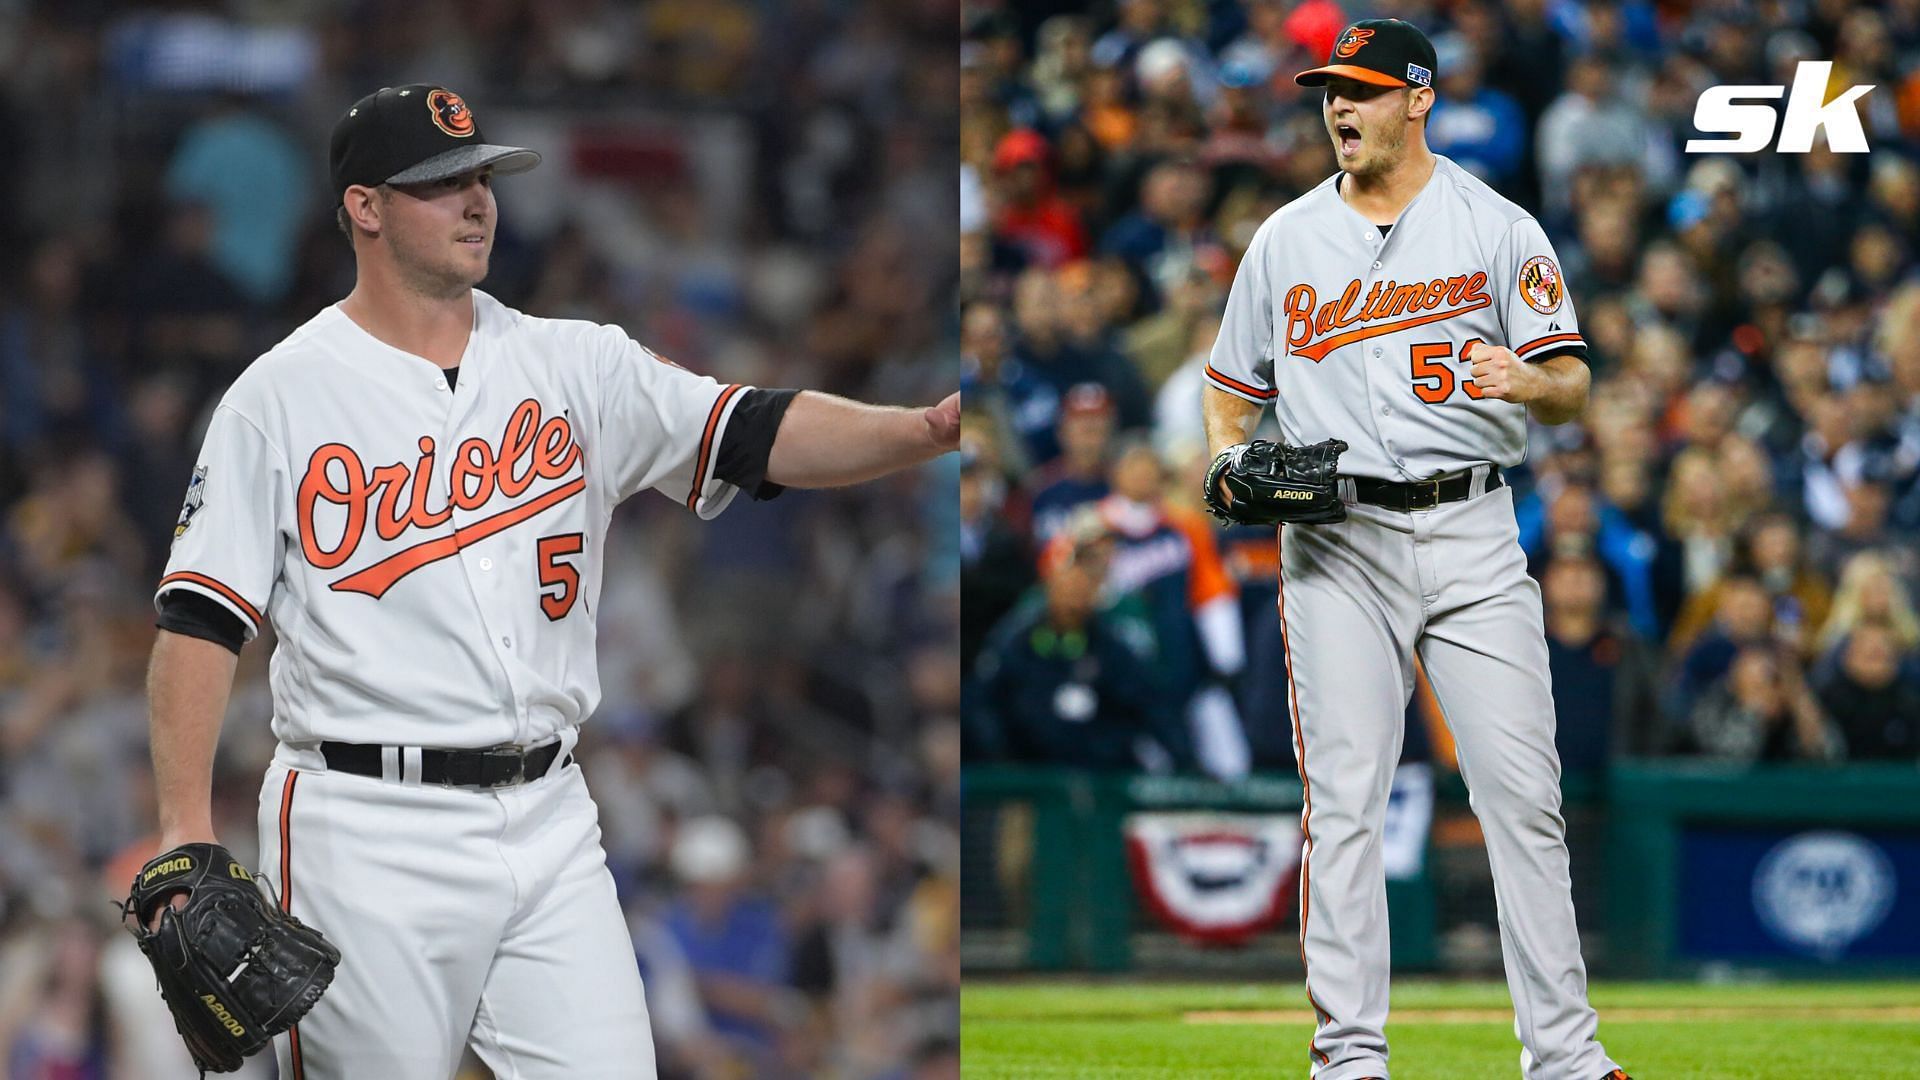 Many fans are surprised to learn that Zack Britton is of Dominican heritage